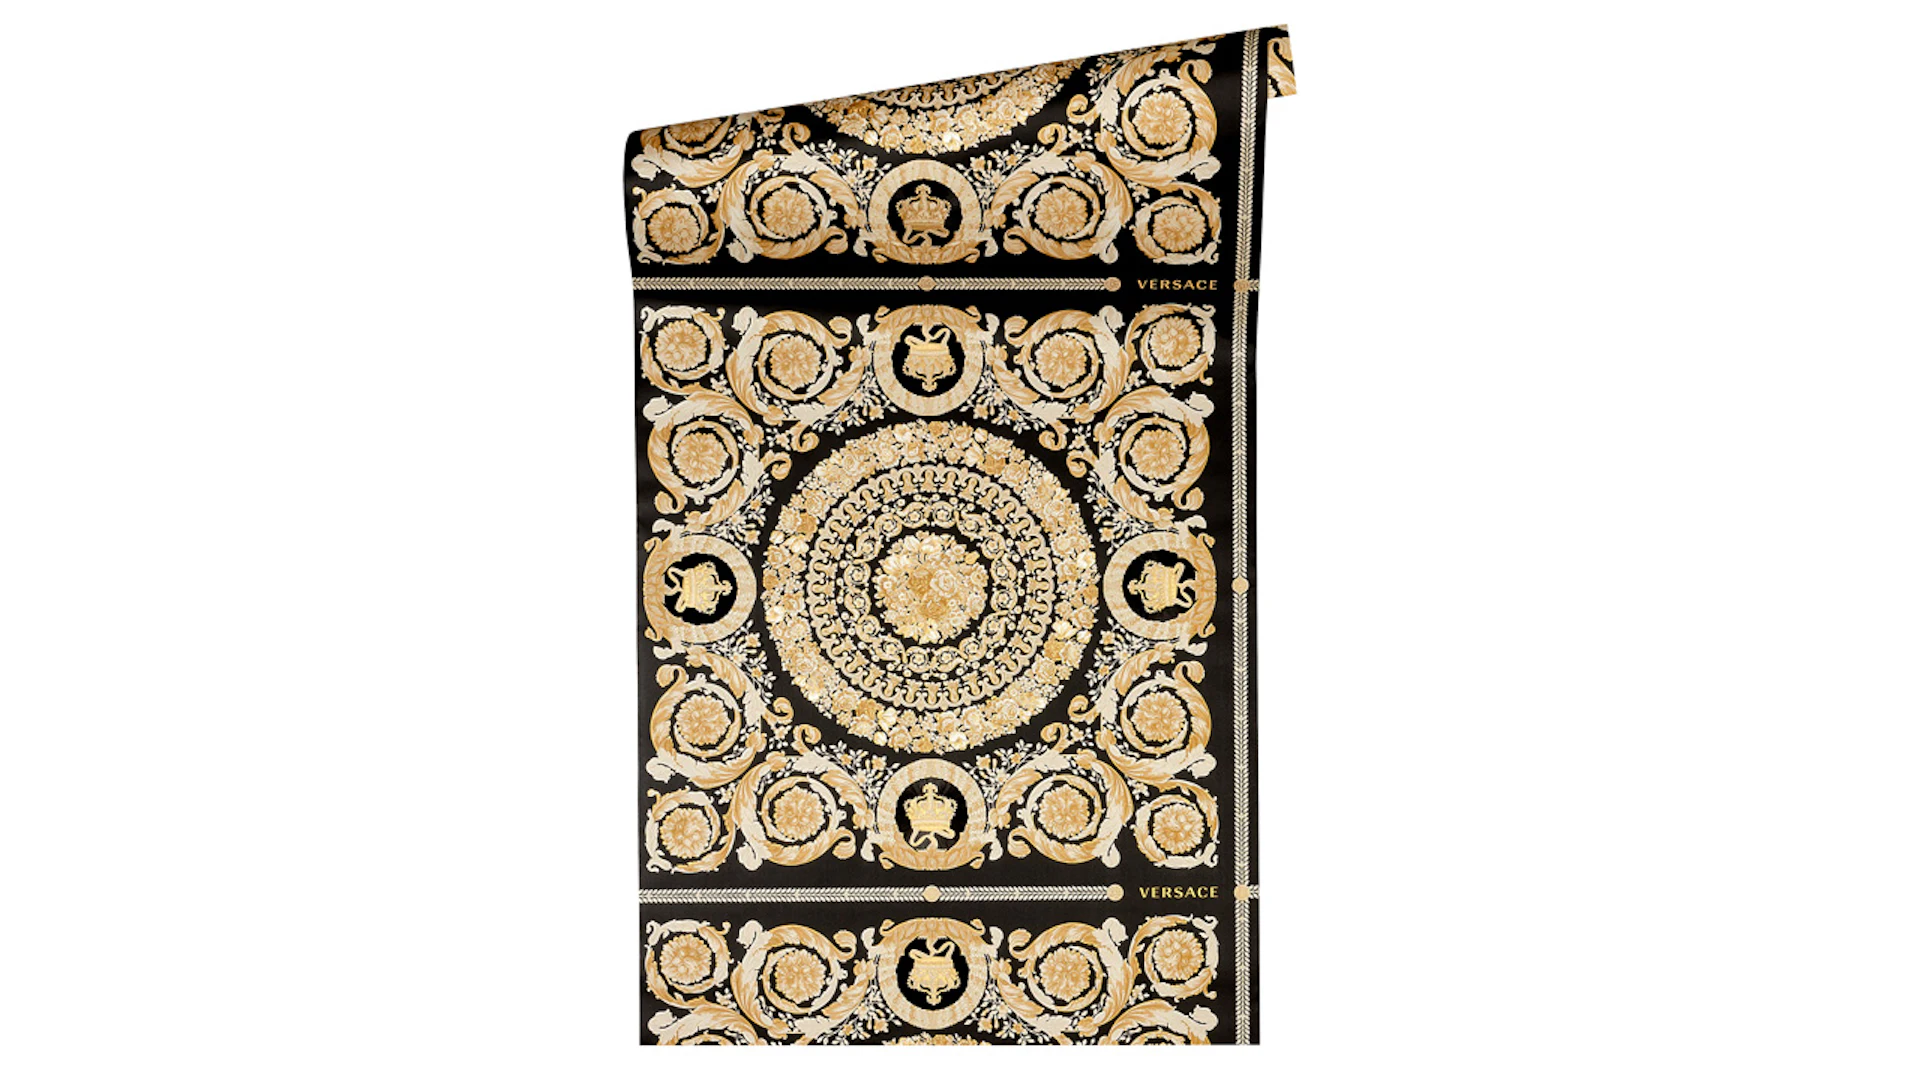 Vinyl wallpaper black country modern classic ornaments pictures flowers & nature Versace 4 553